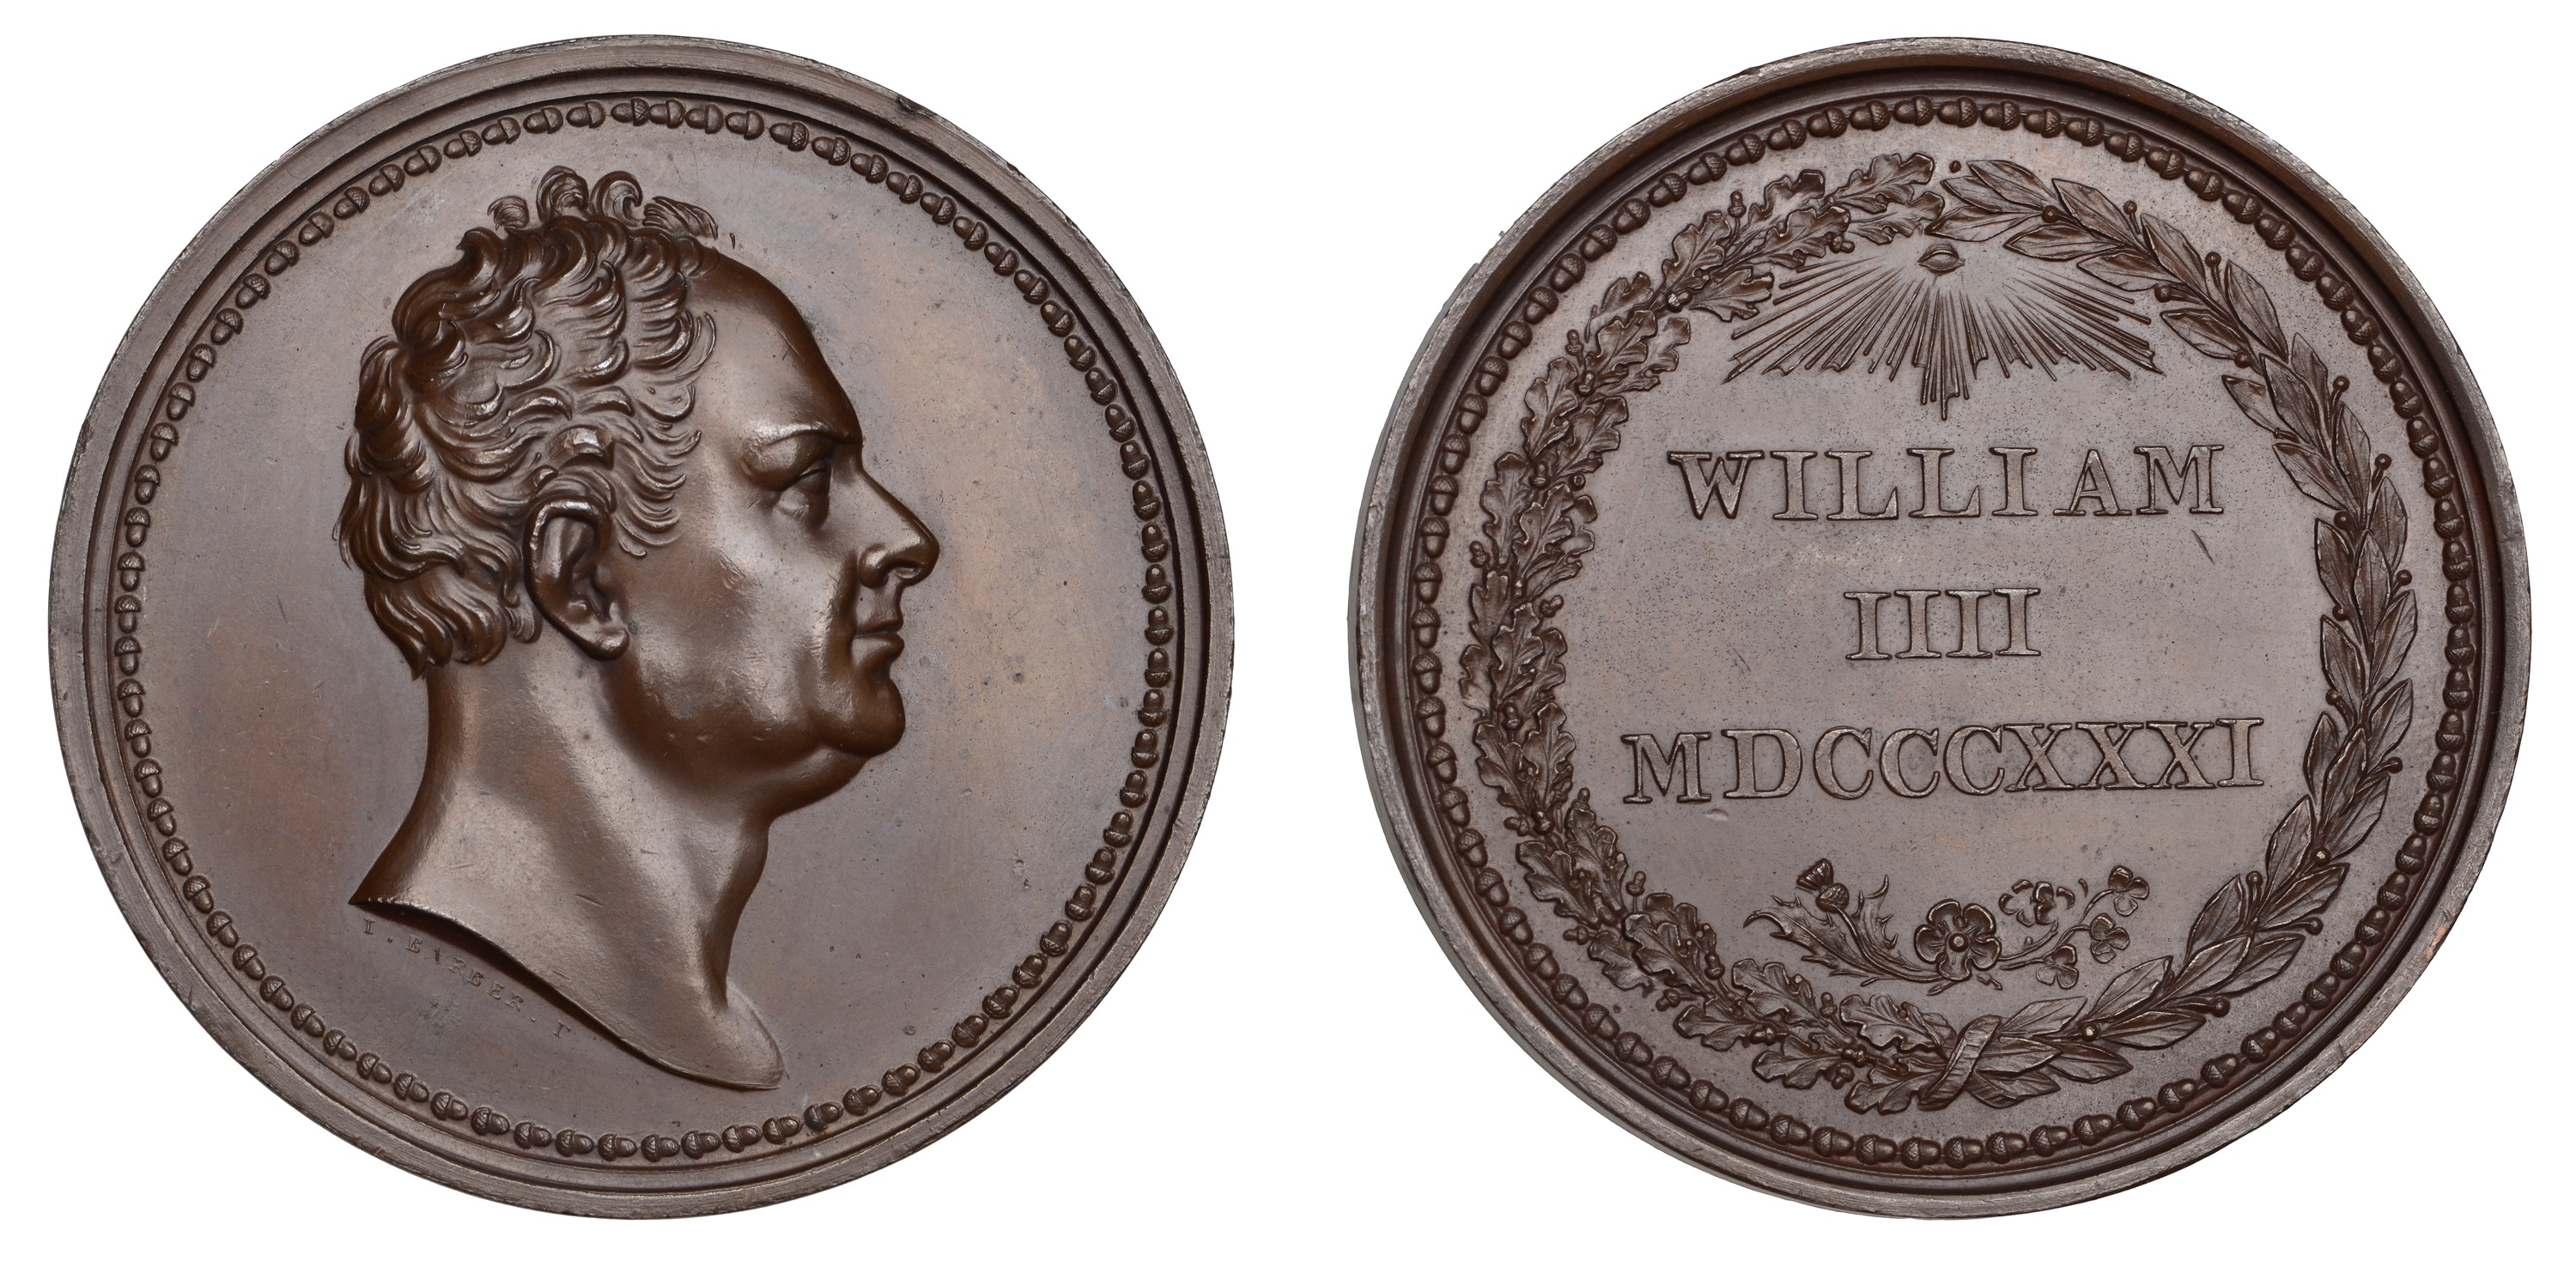 William IV, Coronation, 1831, a bronze medal by J. Barber, bare head right, rev. william iii...